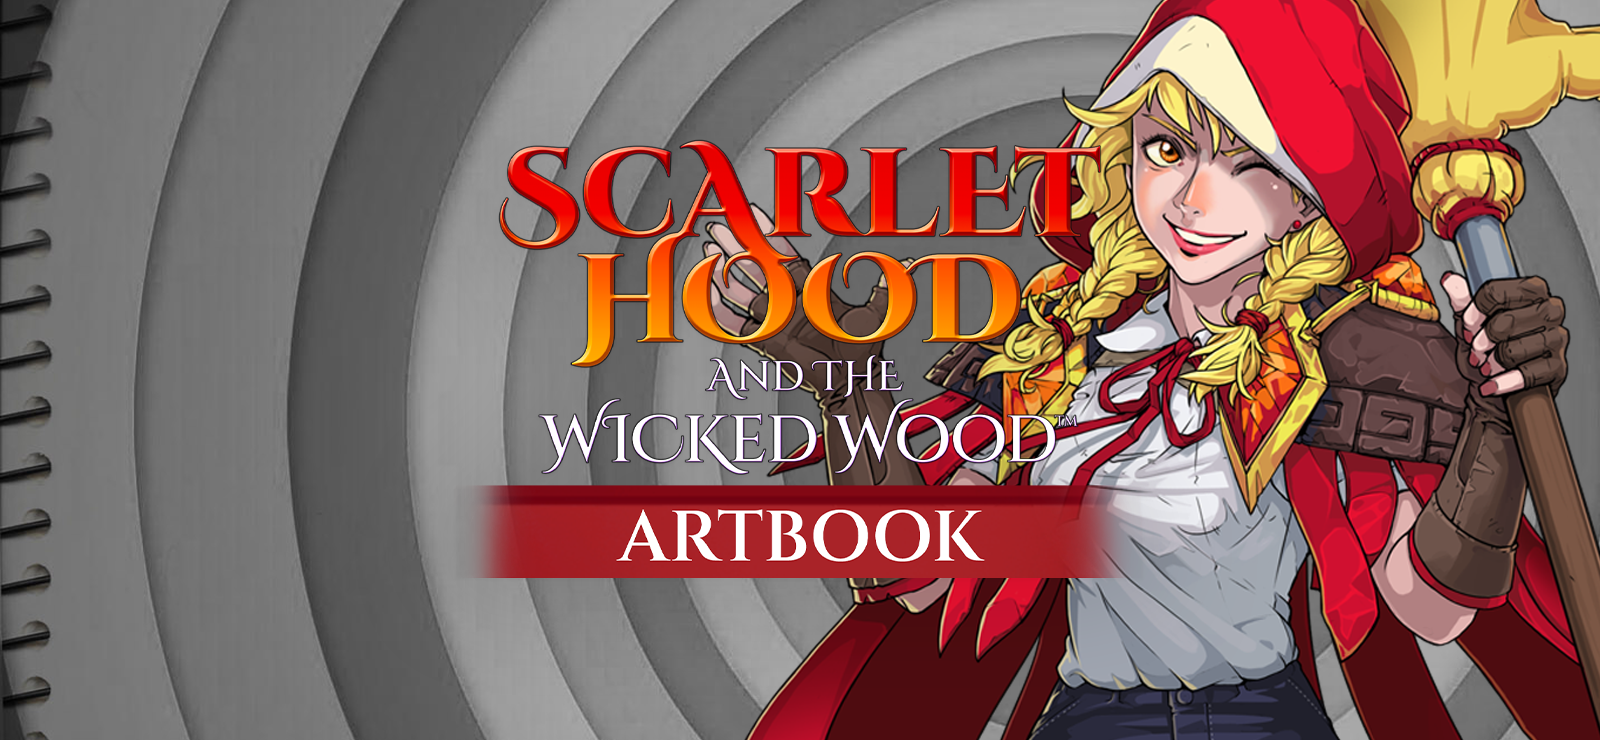 Scarlet Hood And The Wicked Wood – Artbook